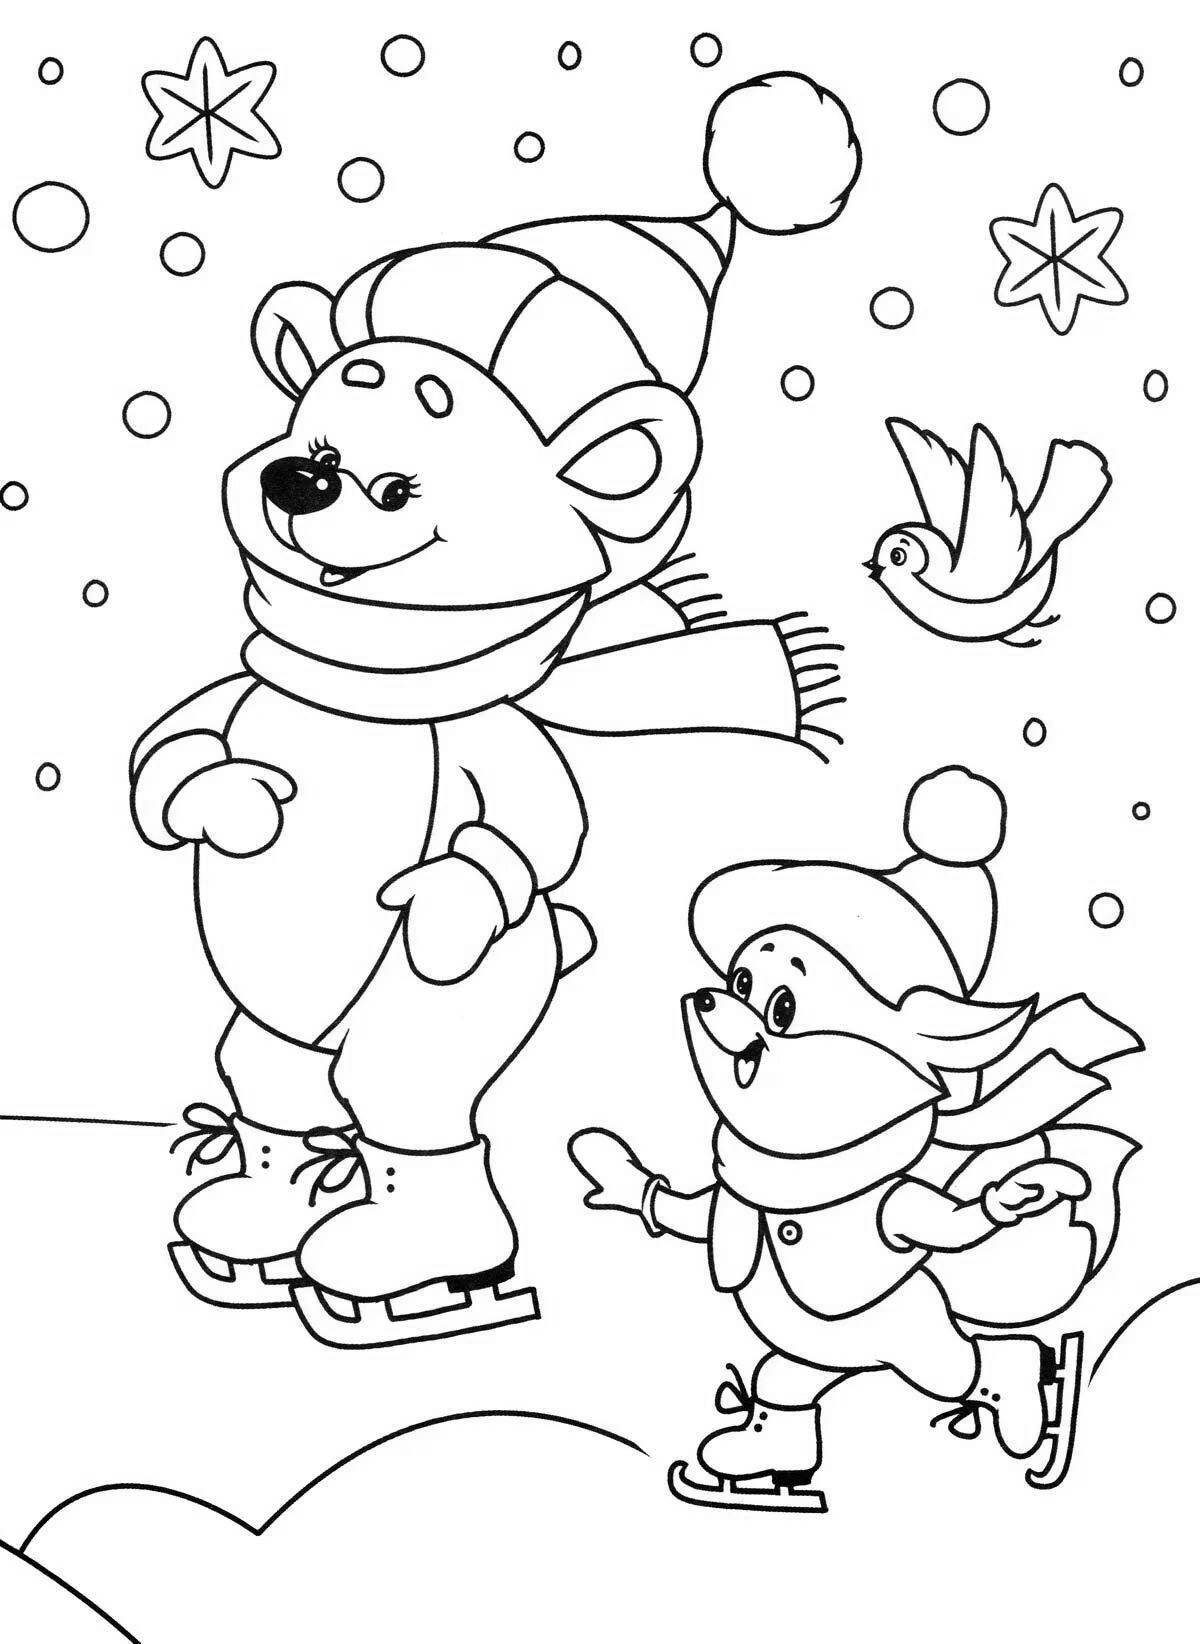 Luminous winter coloring book for children 4 years old